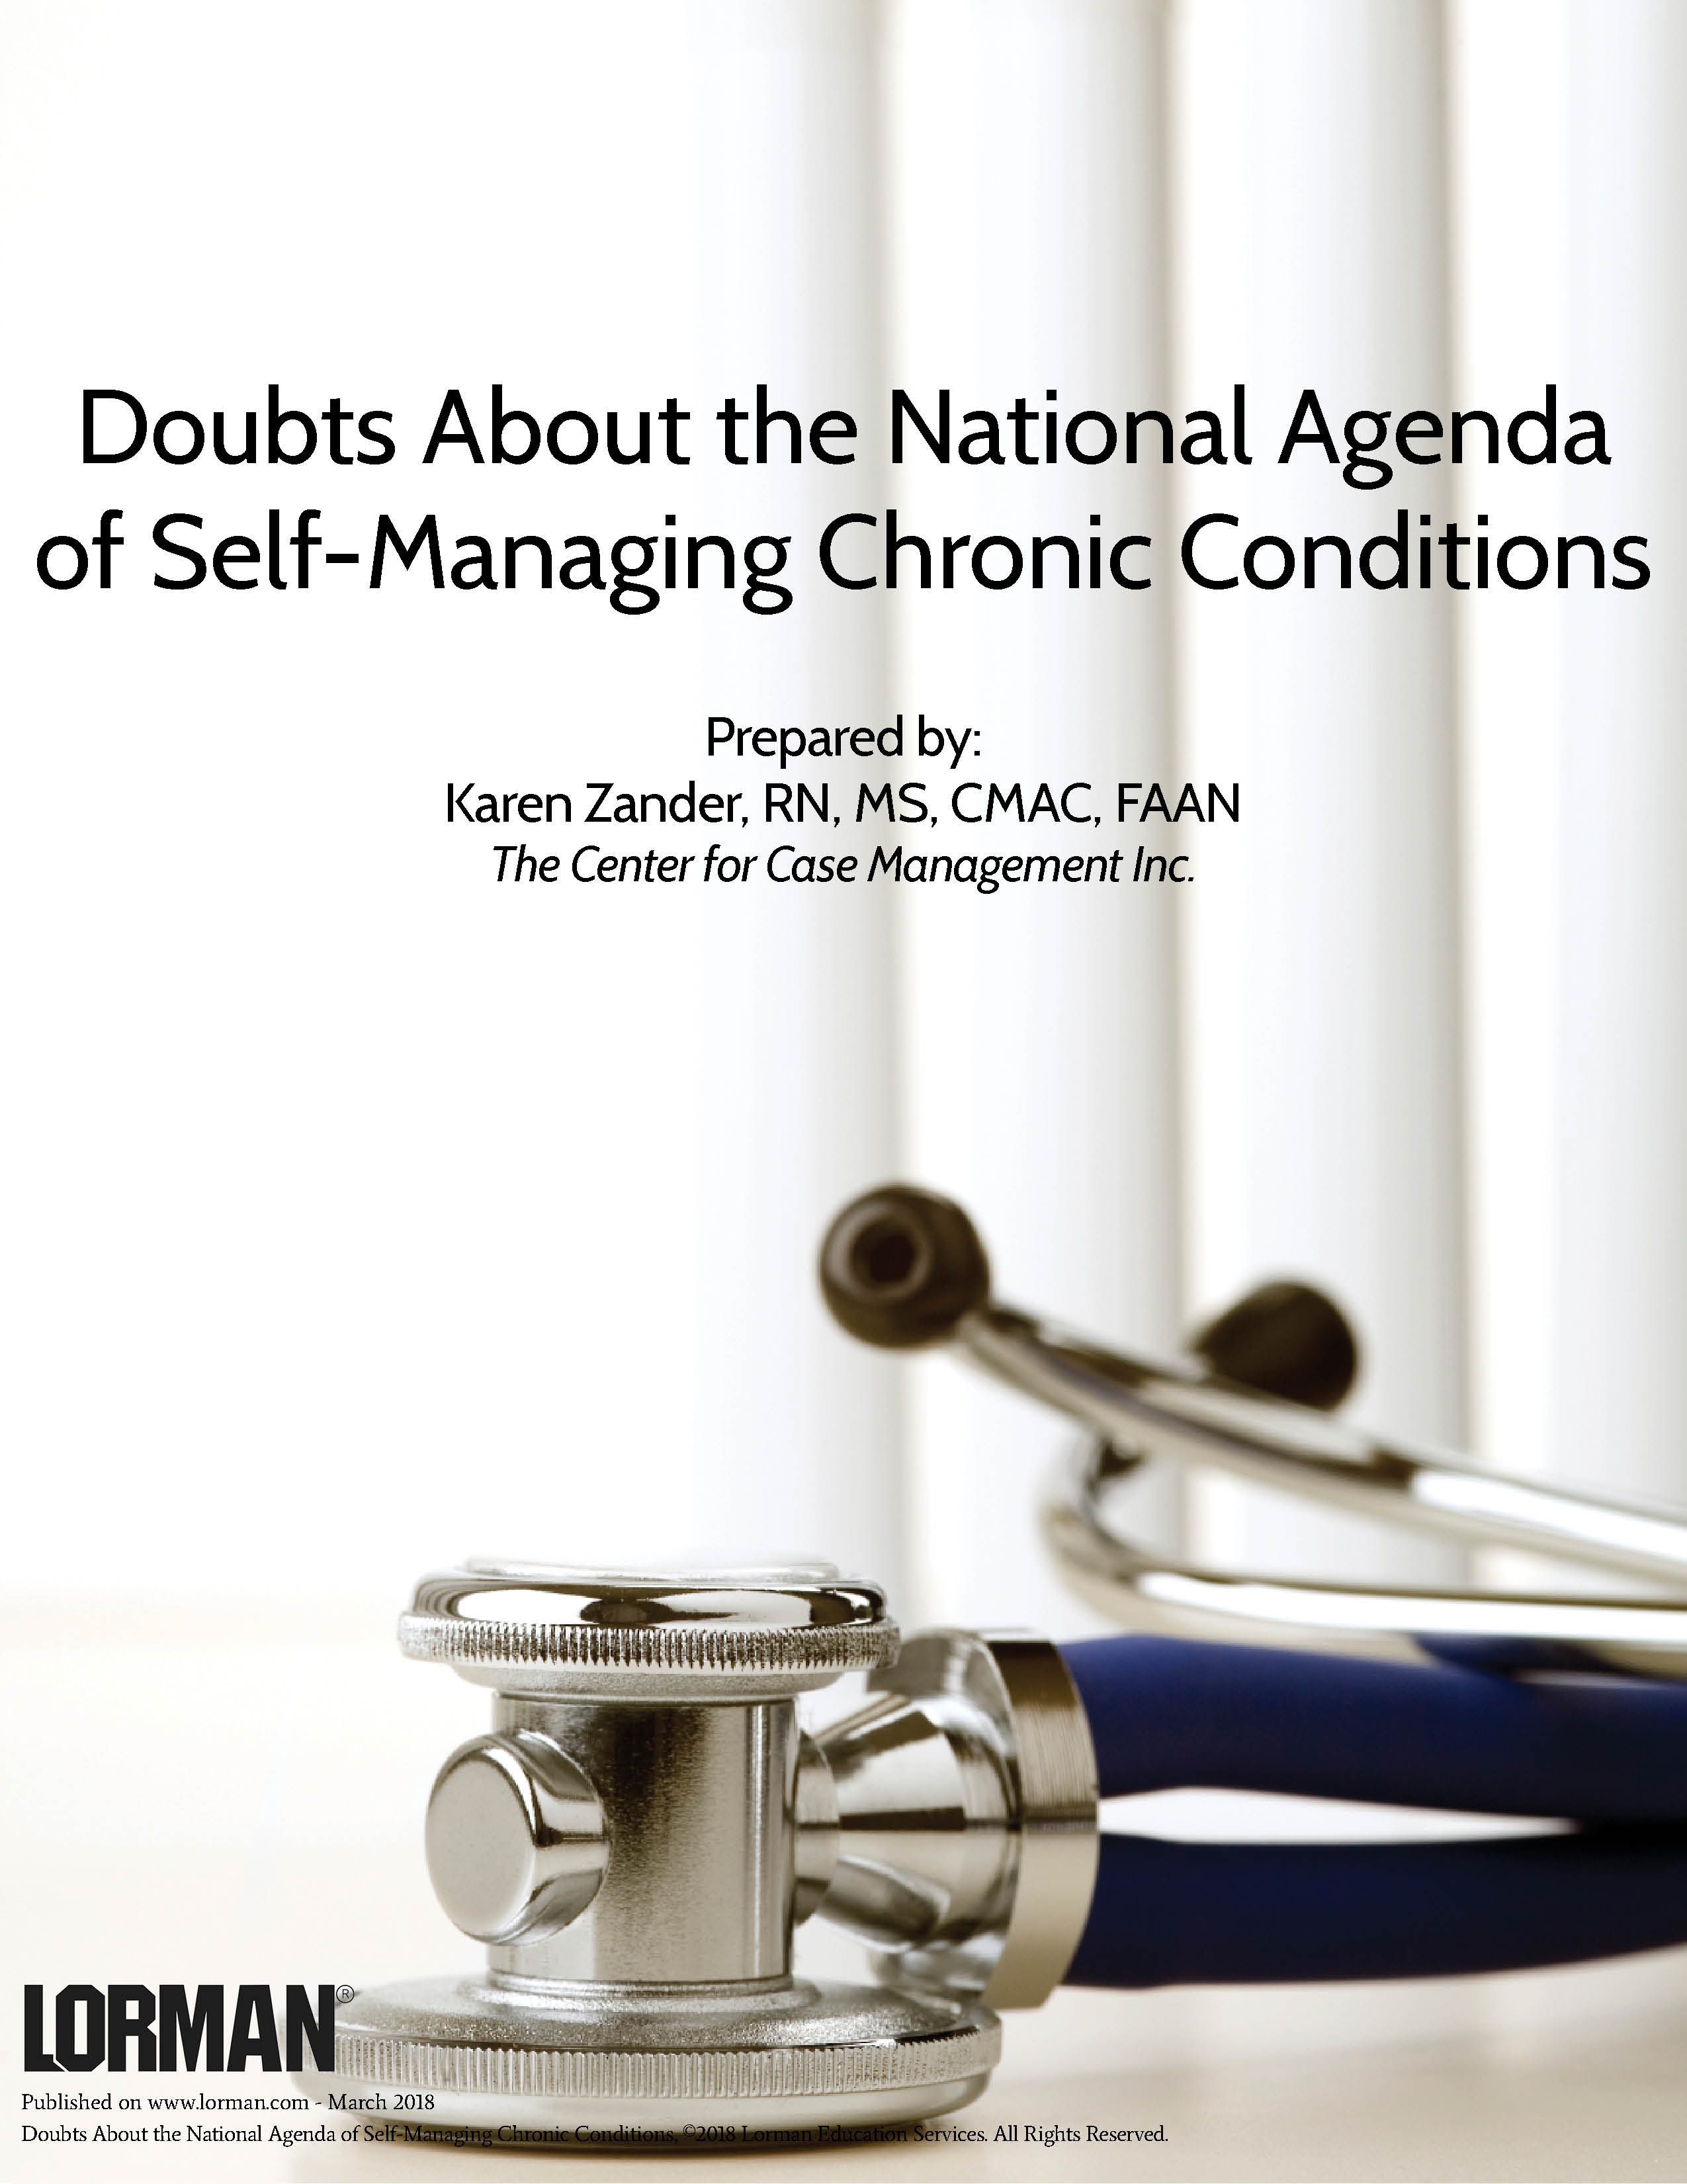 Doubts About the National Agenda of Self-Managing Chronic Conditions